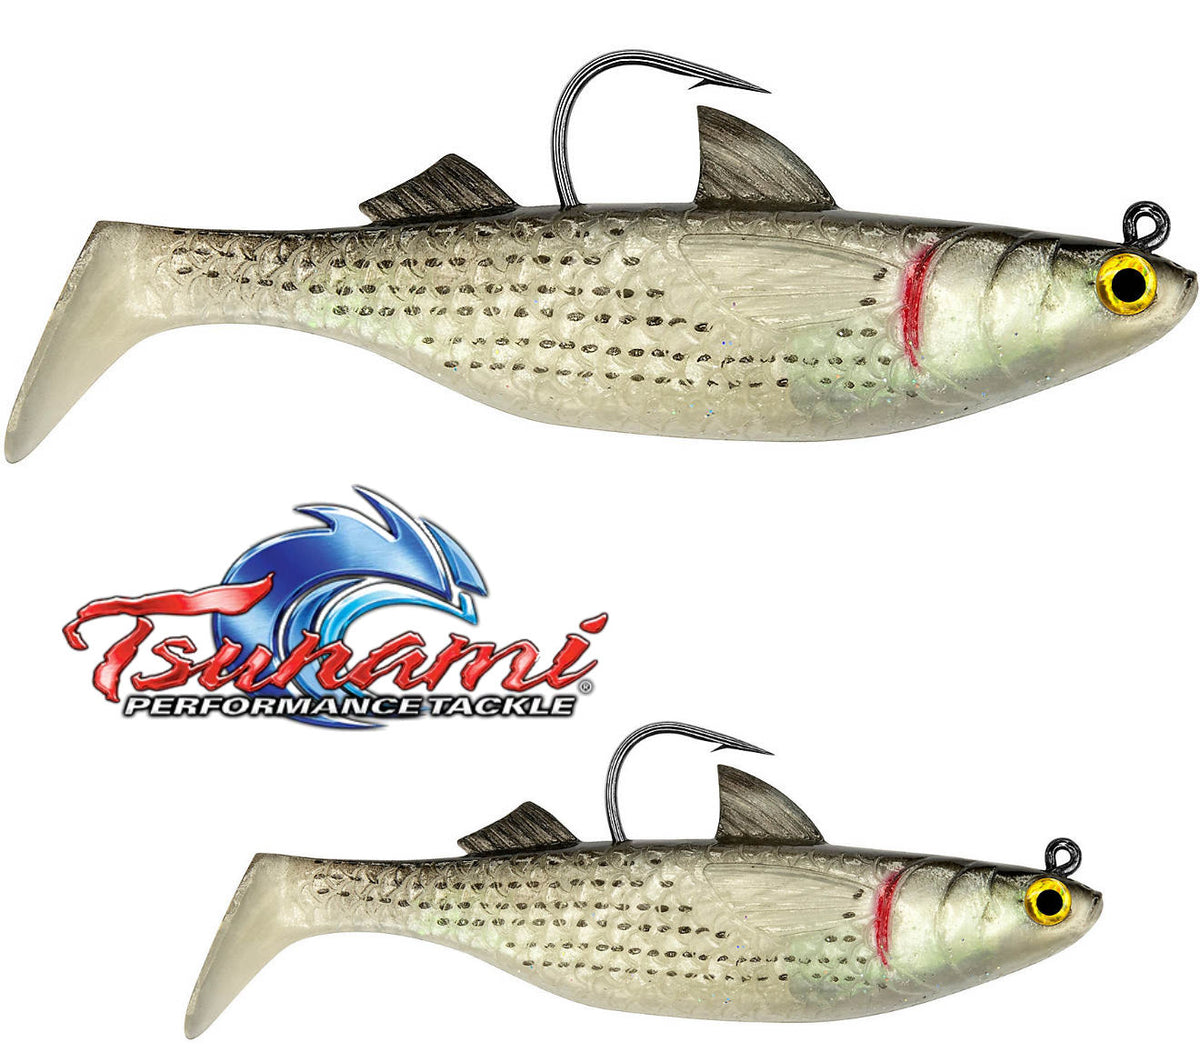 Tsunami Tidal Pro Baits target any saltwater species from stripers